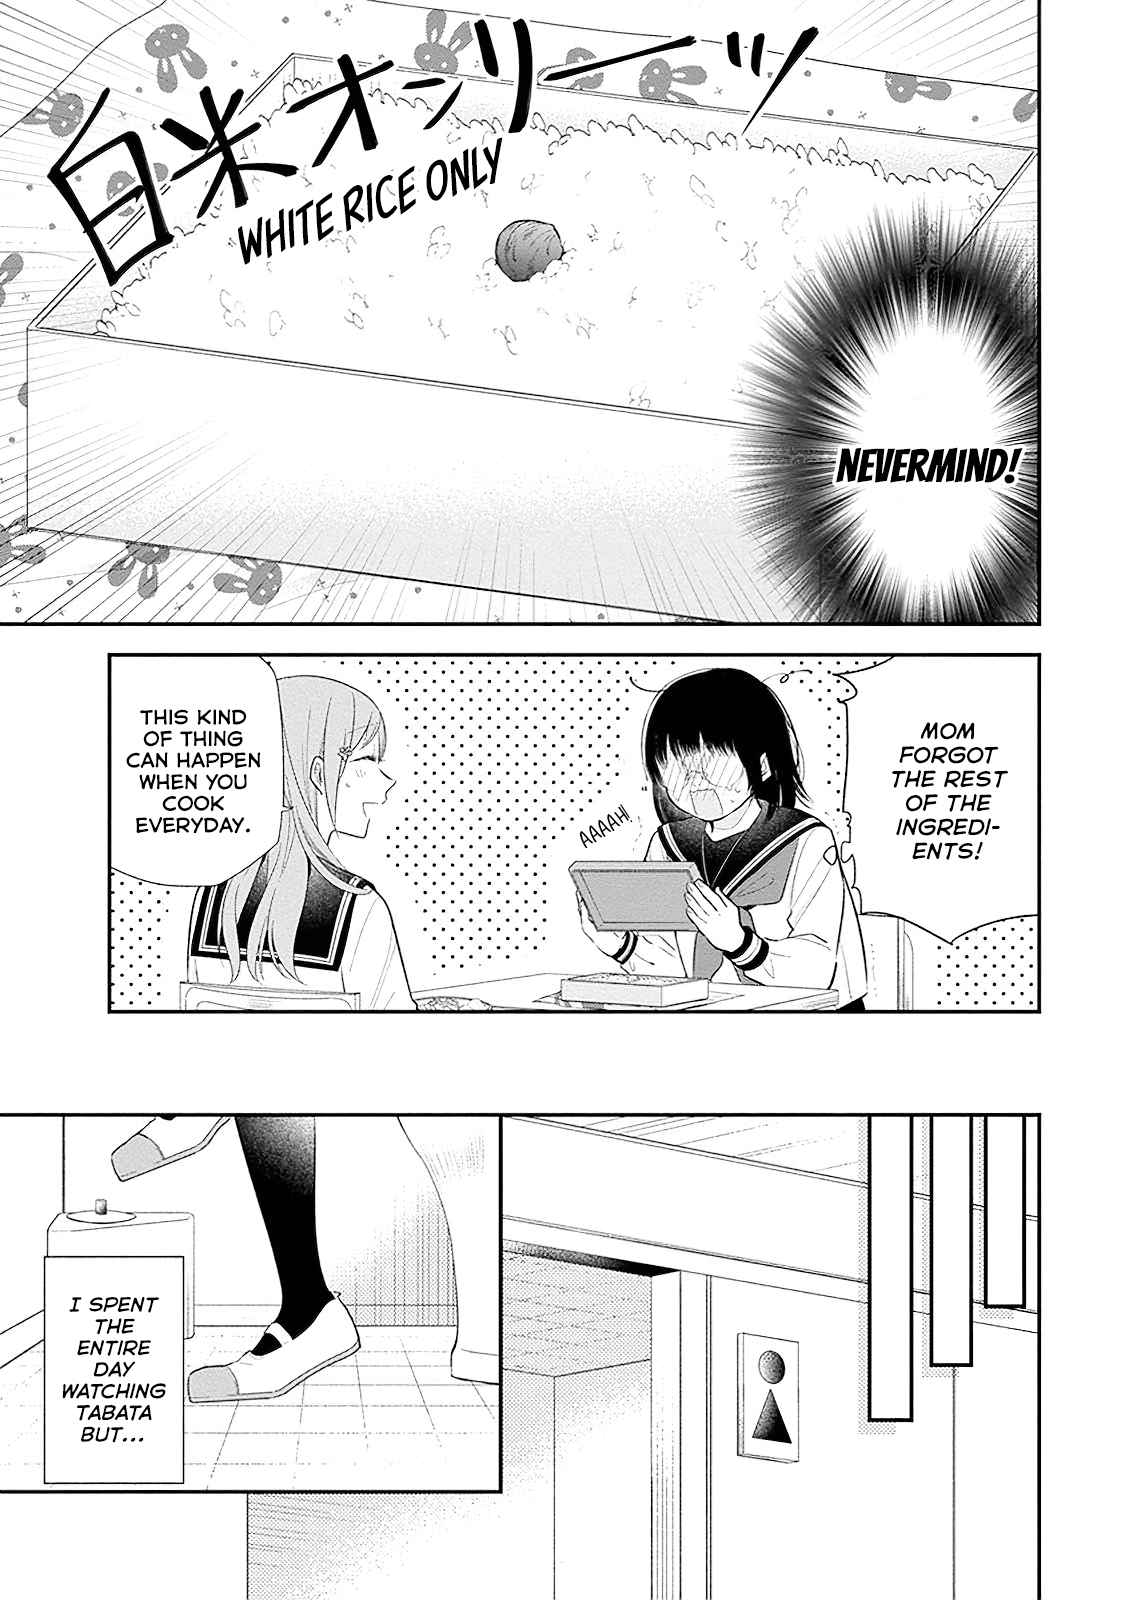 A Bouquet For An Ugly Girl Vol. 1 Ch. 6 Fabricated Cuteness